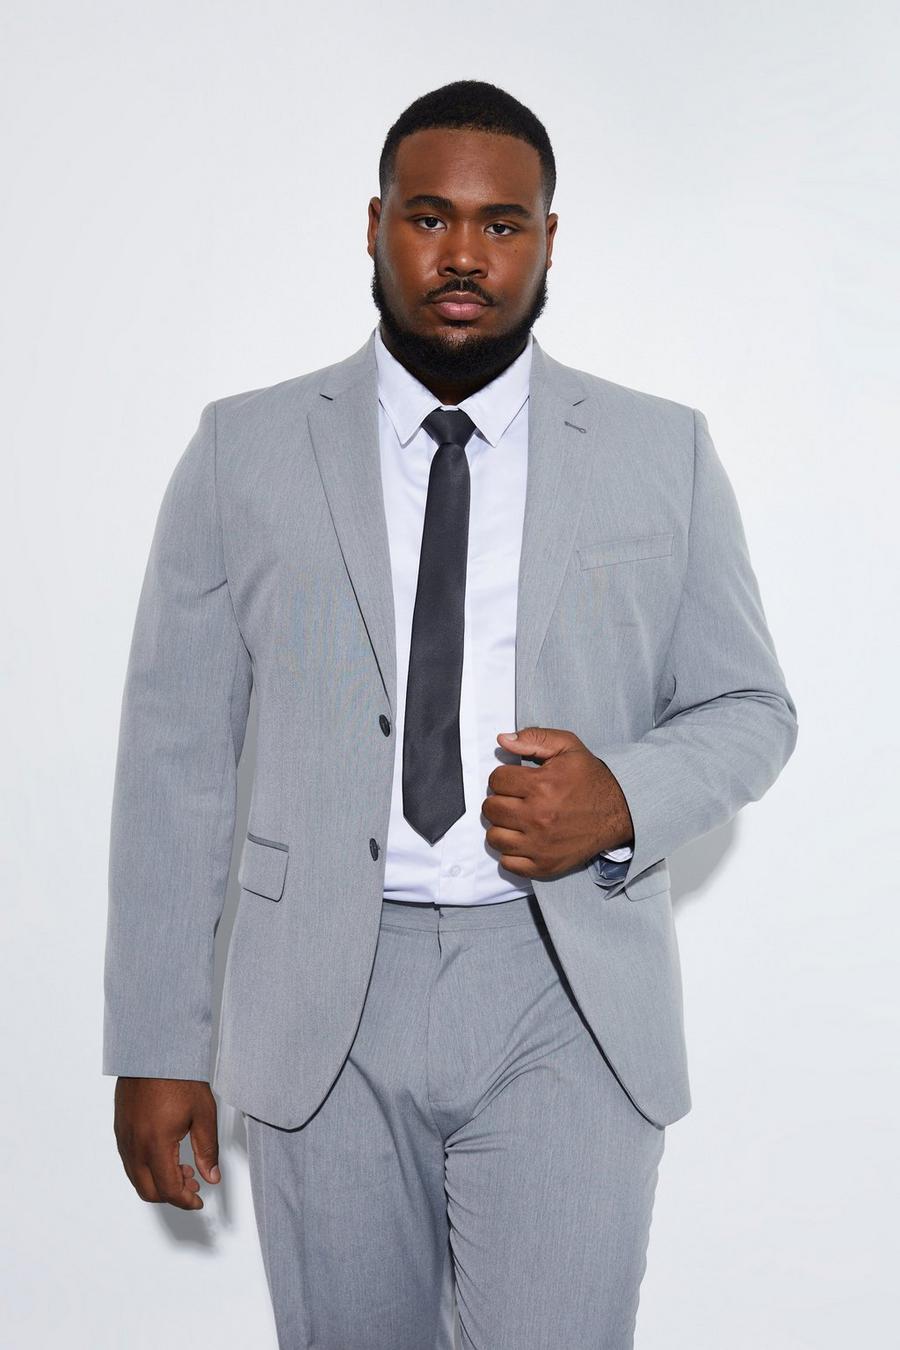 Big & Tall Suits, Mens Plus Size Suits